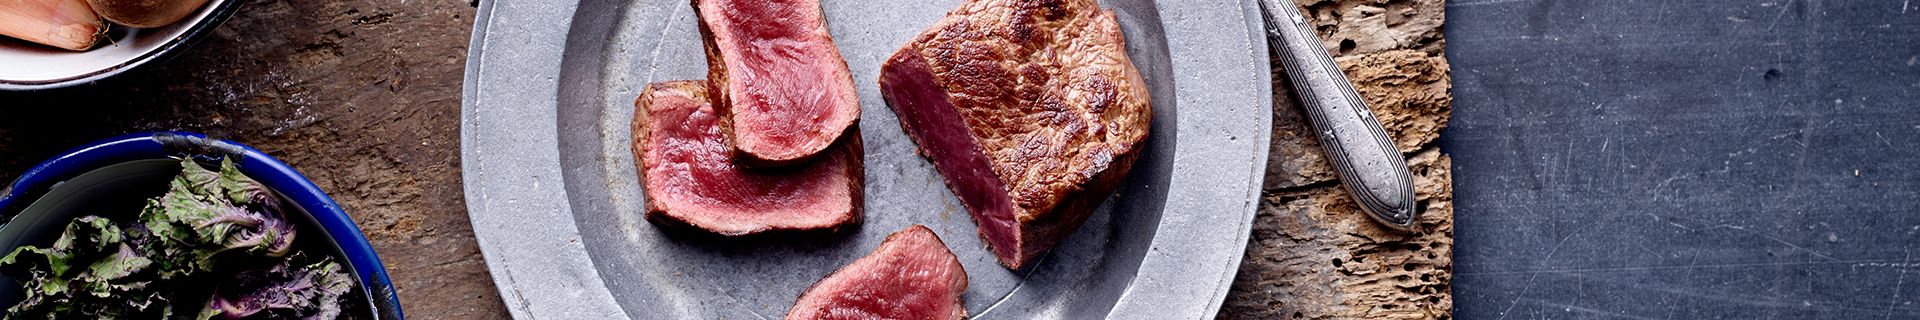 How To Cook A Venison Steak